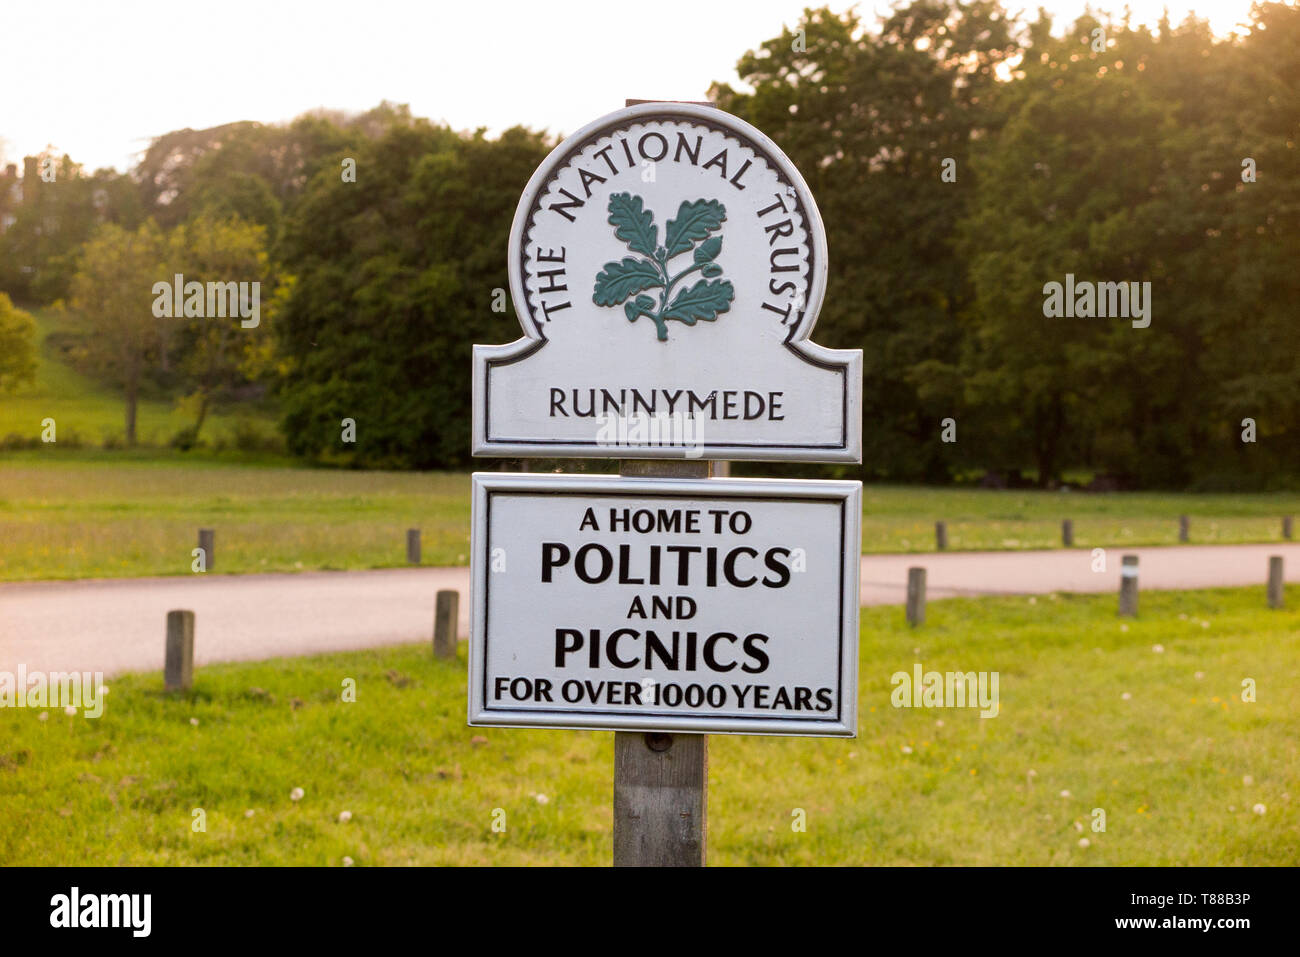 National Trust sign / signpost / post; Runnymede, Surrey. UK. Runnymede was the site of the signing of Magna Carta in year 1215. (108) Stock Photo